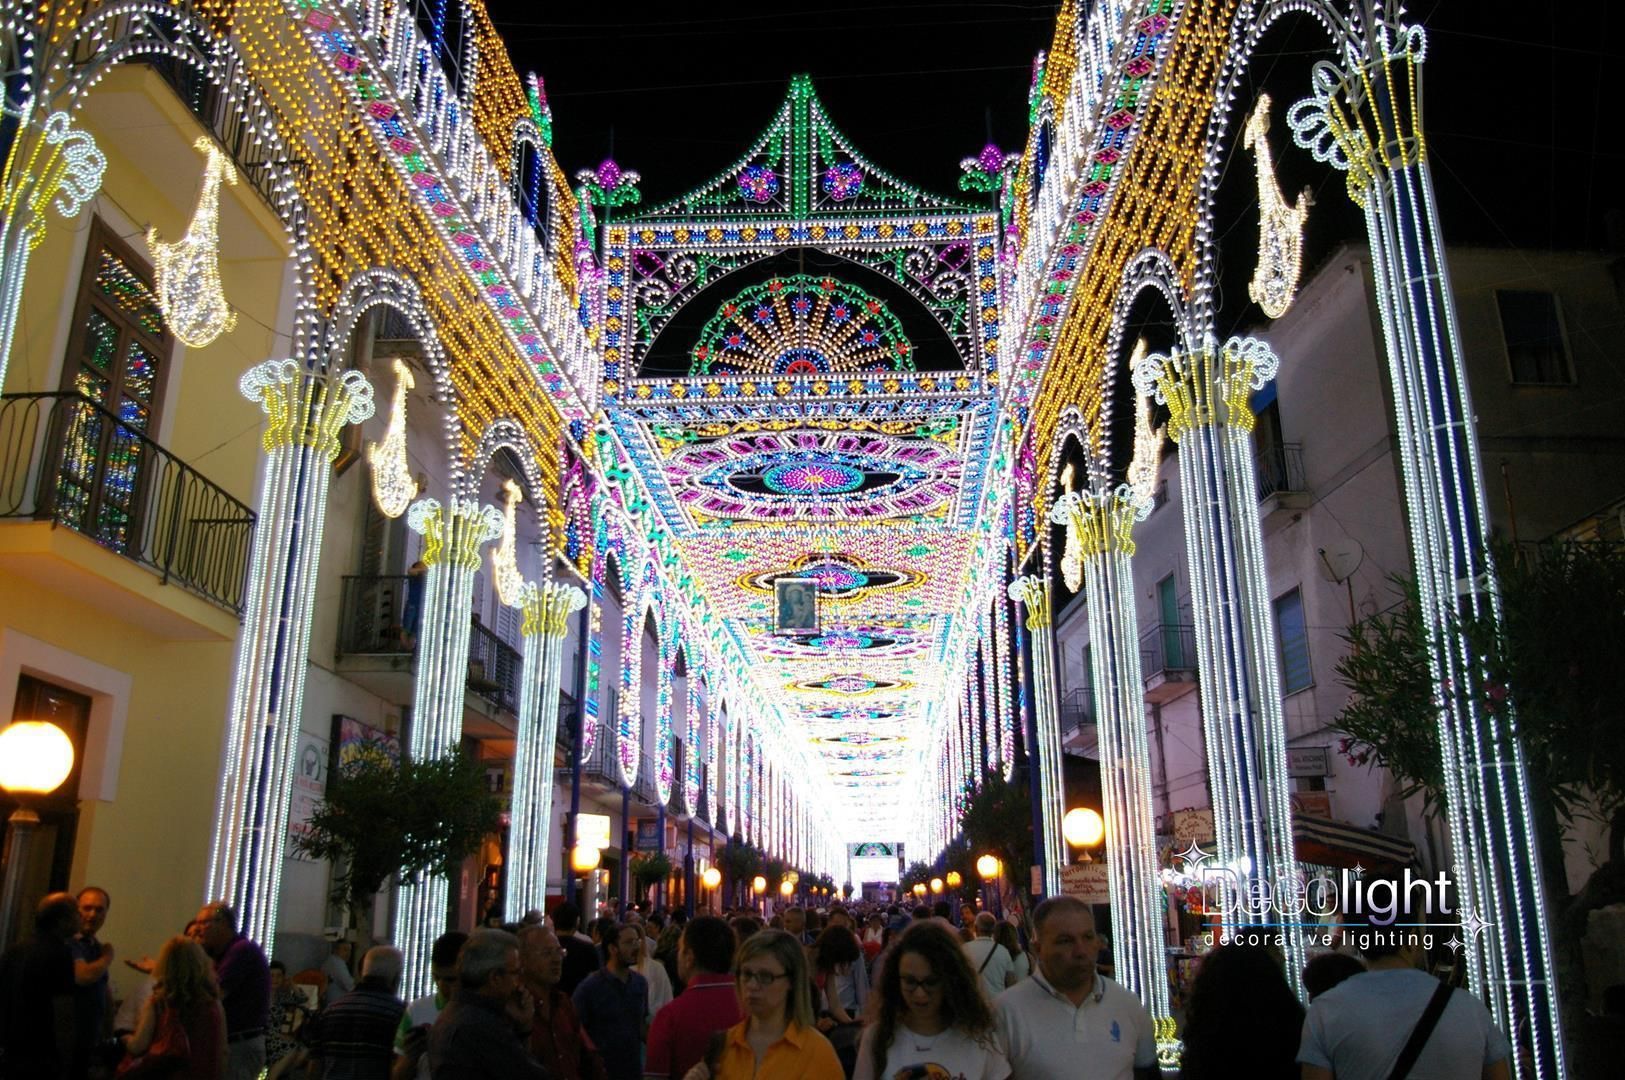 Luminarie Artistiche , Decolight Decolight Other spaces Other artistic objects